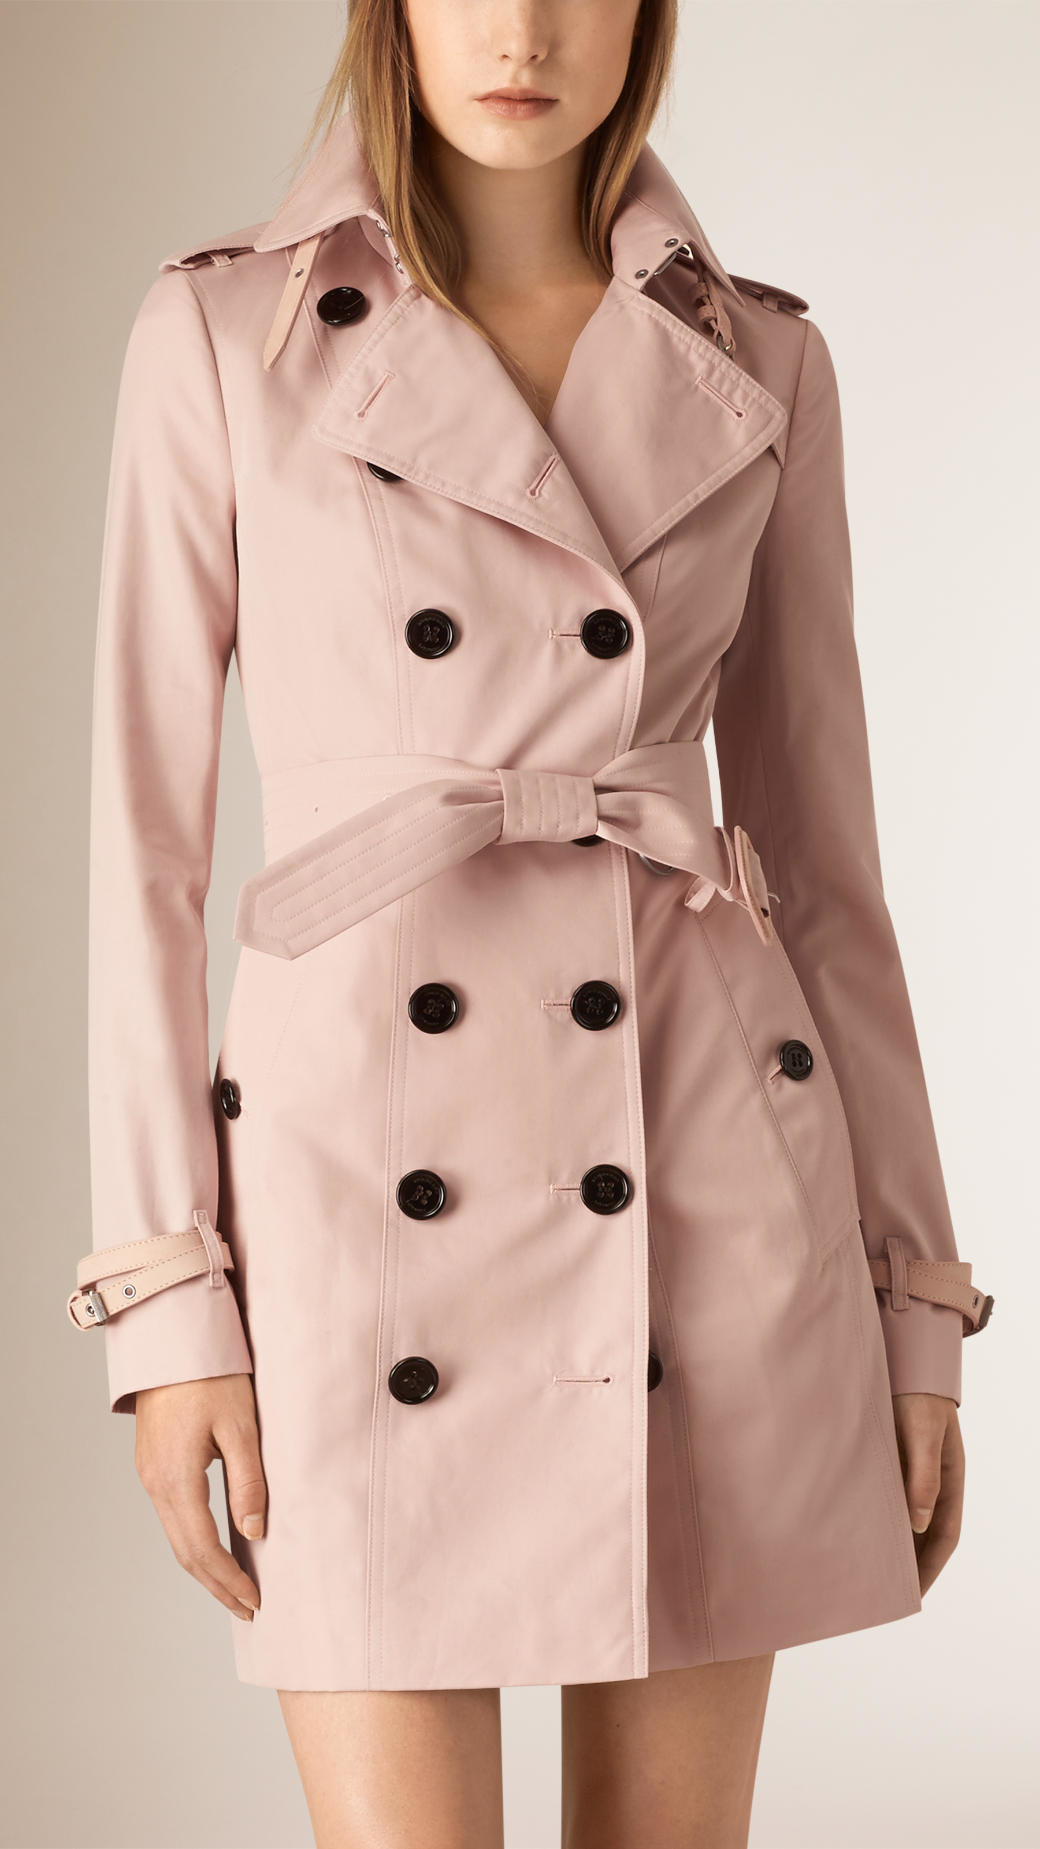 Burberry Leather Trim Cotton Gabardine Trench Coat in Pink | Lyst